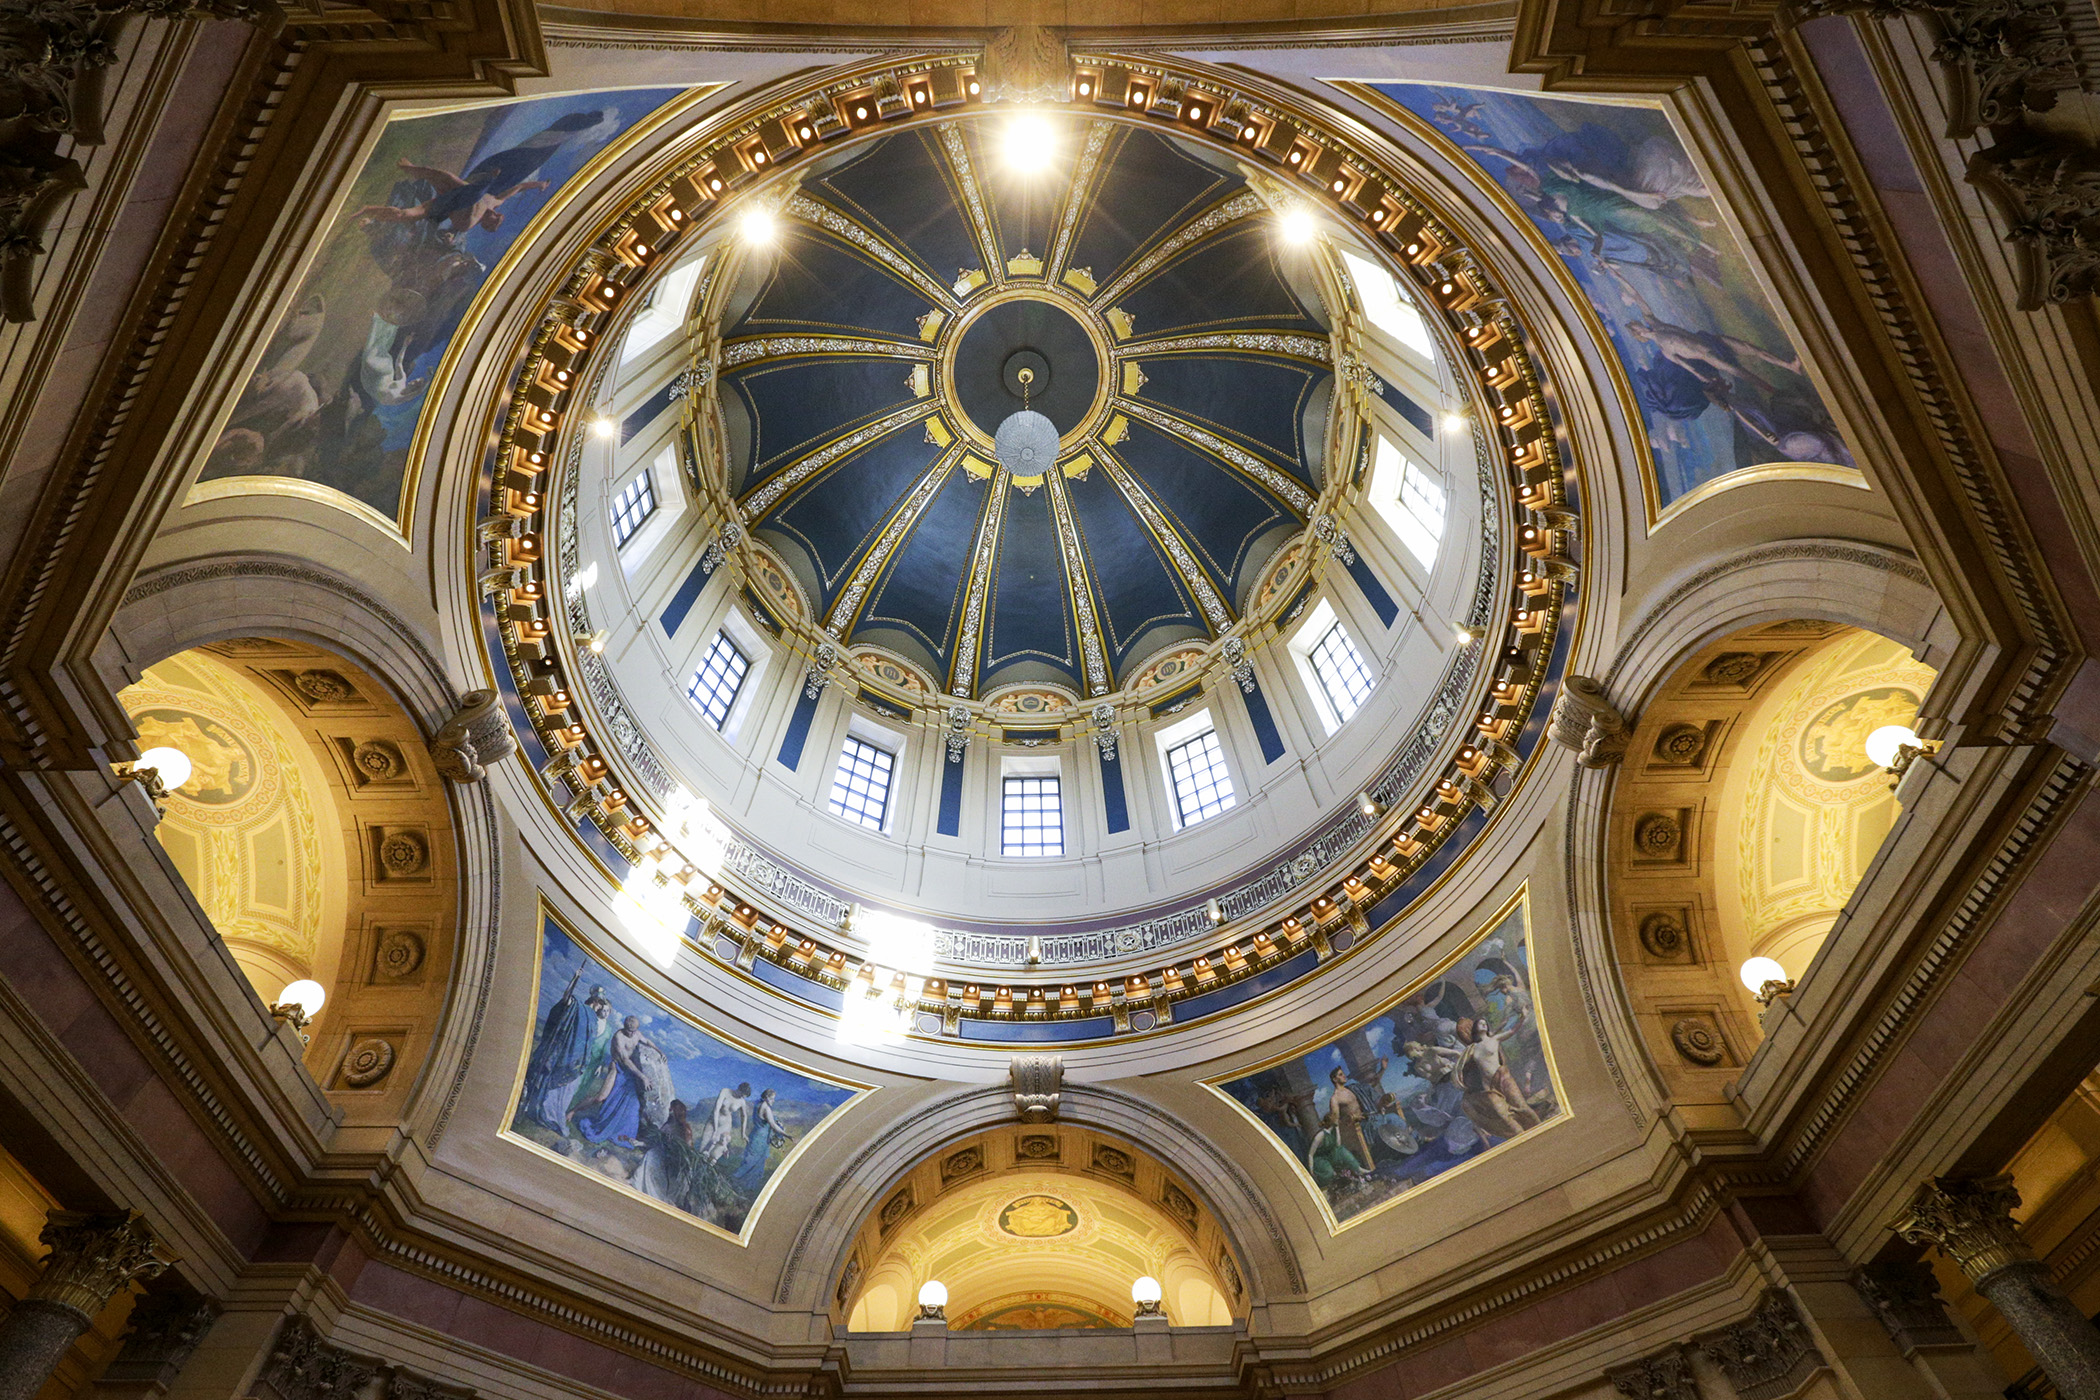 A view of the inside of the Capitol Dome from the Rotunda. Photo by Paul Battaglia